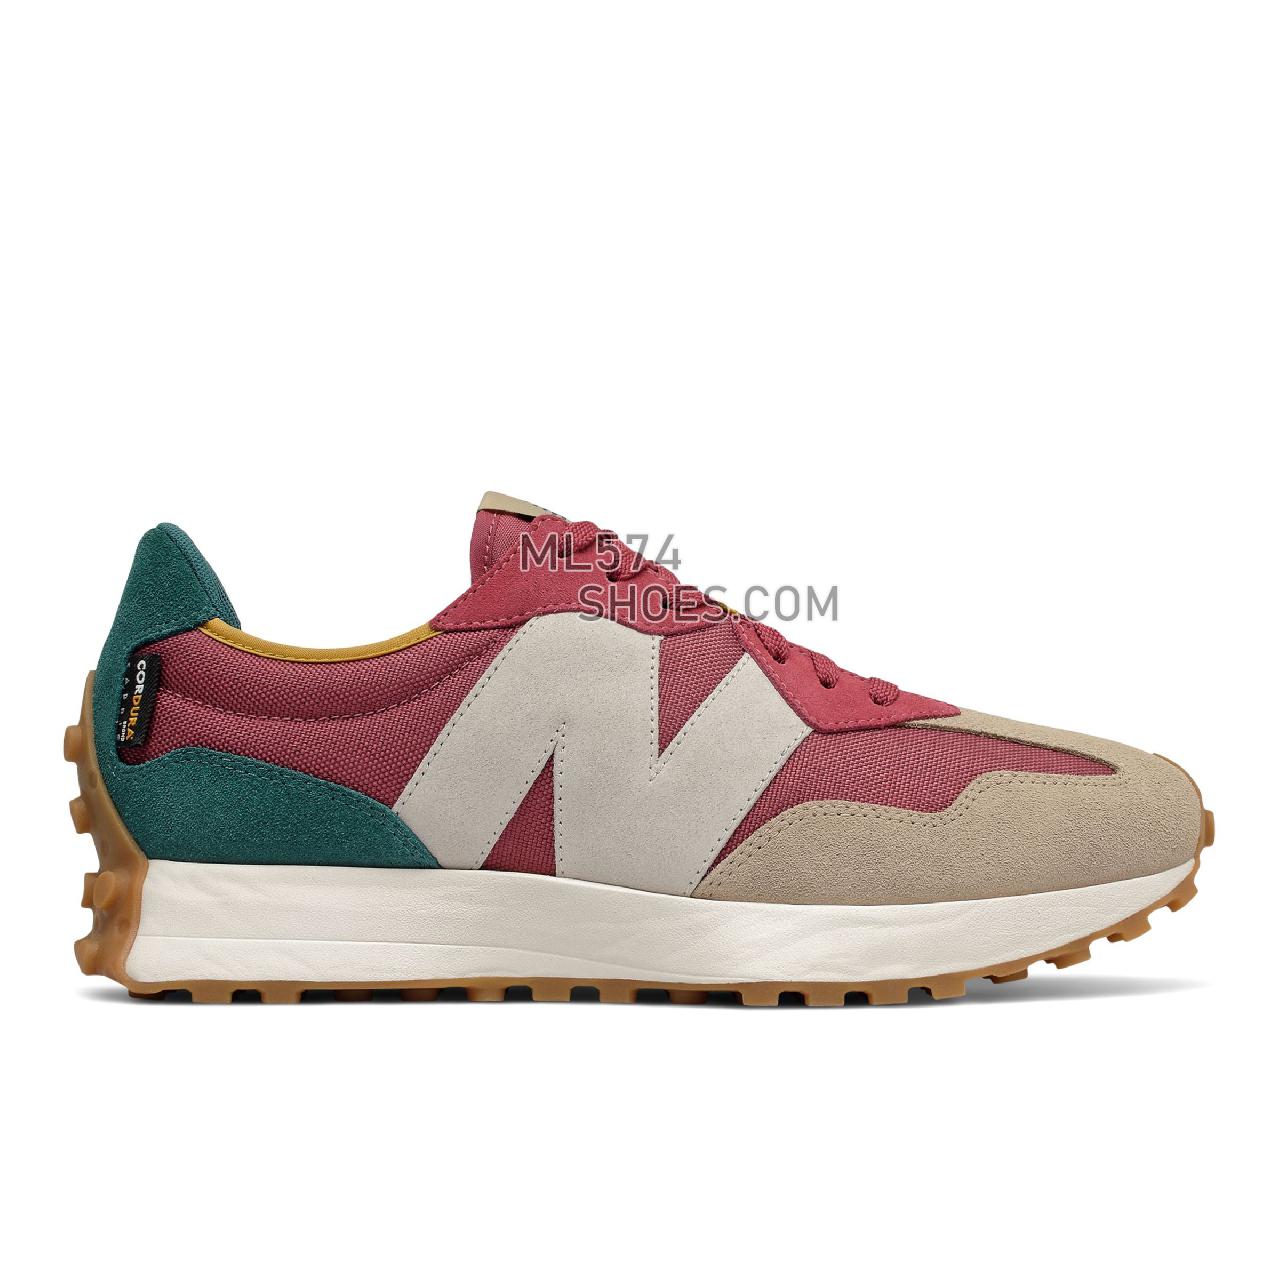 New Balance 327 - Unisex Men's Women's Sport Style Sneakers - Earth Red with Mountain Teal - MS327WT1